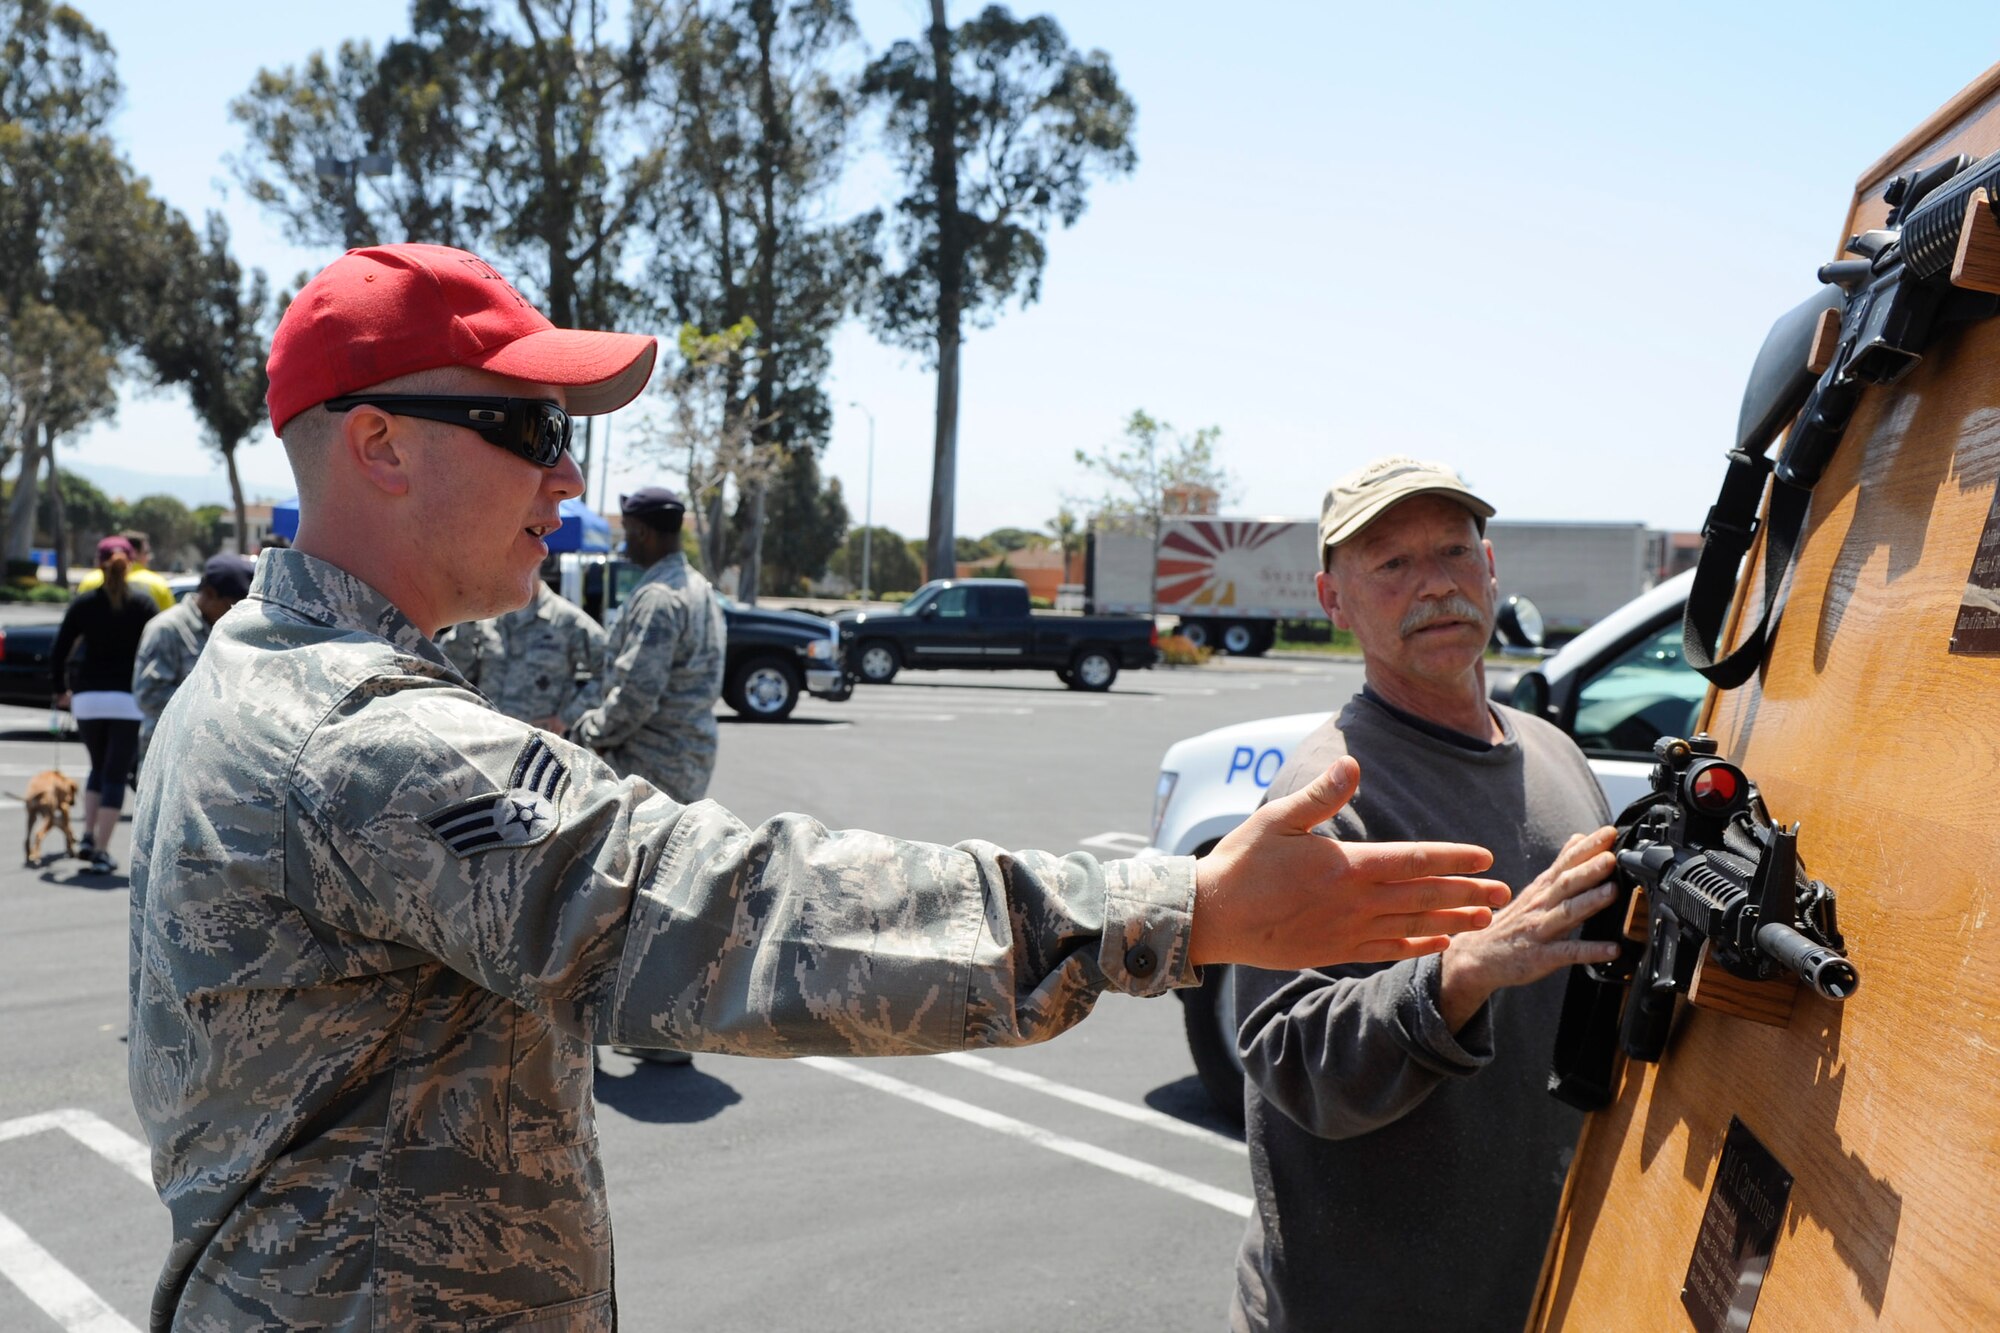 VANDENBERG AIR FORCE BASE, Calif. -- Senior Airman Nathan Lowman, 30th Security Forces Squadron combat arms instructor, talks to a local man about the M4 Carbine used by the U.S. Air Force during a police display event at the Albertsons parking lot in Lompoc, Wednesday, May 16th, 2012. The display was held in conjunction with National Police Week, an annual celebration that recognizes the service and sacrifice of U.S. law enforcement personnel. (U.S. Air Force photo/Staff Sgt. Levi Riendeau)
